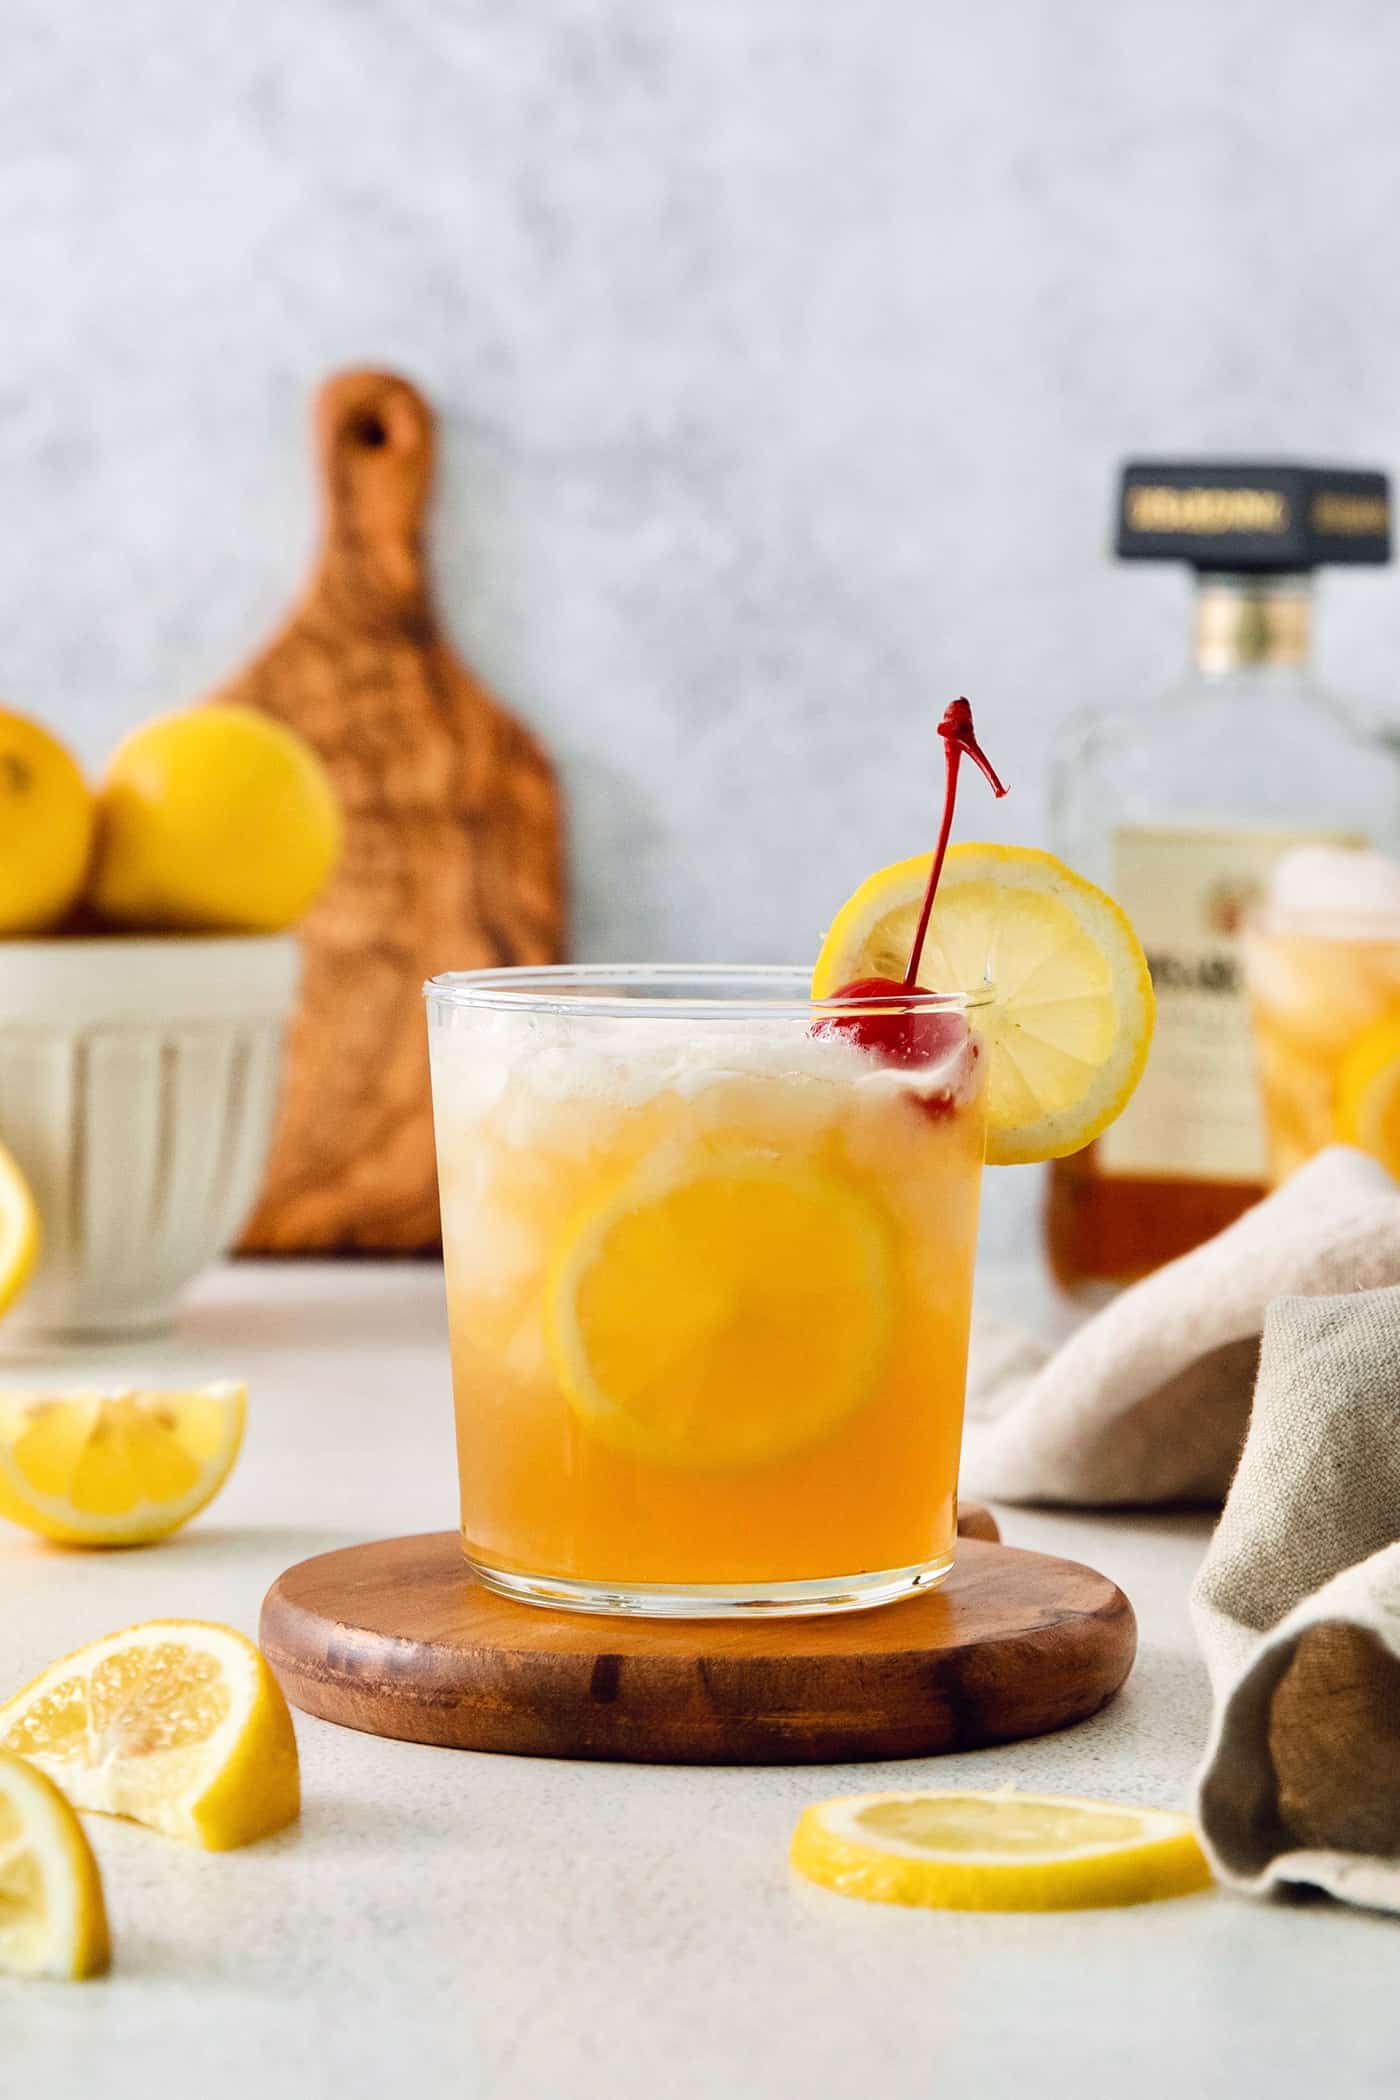 A lemon-garnished glass of amaretto sour is shown on a wooden circle with lemon slices around it and lemons in the background.